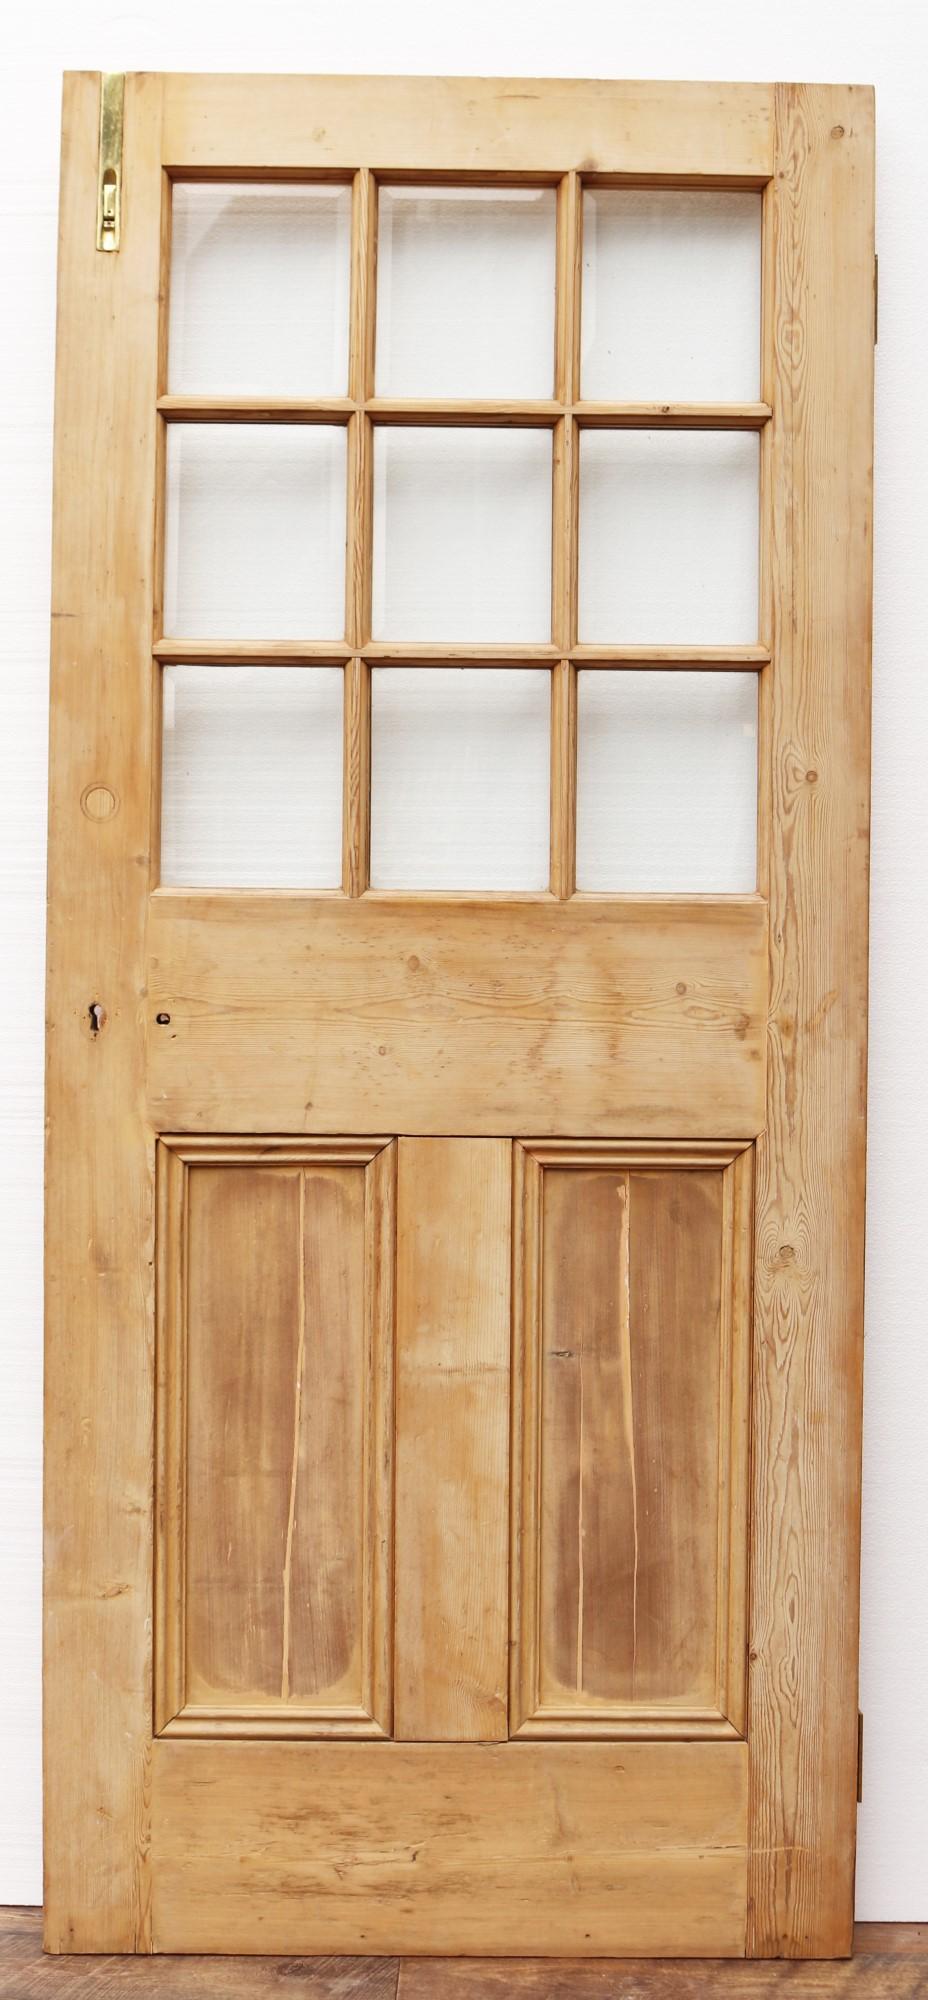 A glazed pine door with a stripped and sanded finish. The glazing is complete and consists of bevelled glass.
 
Suitable for interior or exterior use.